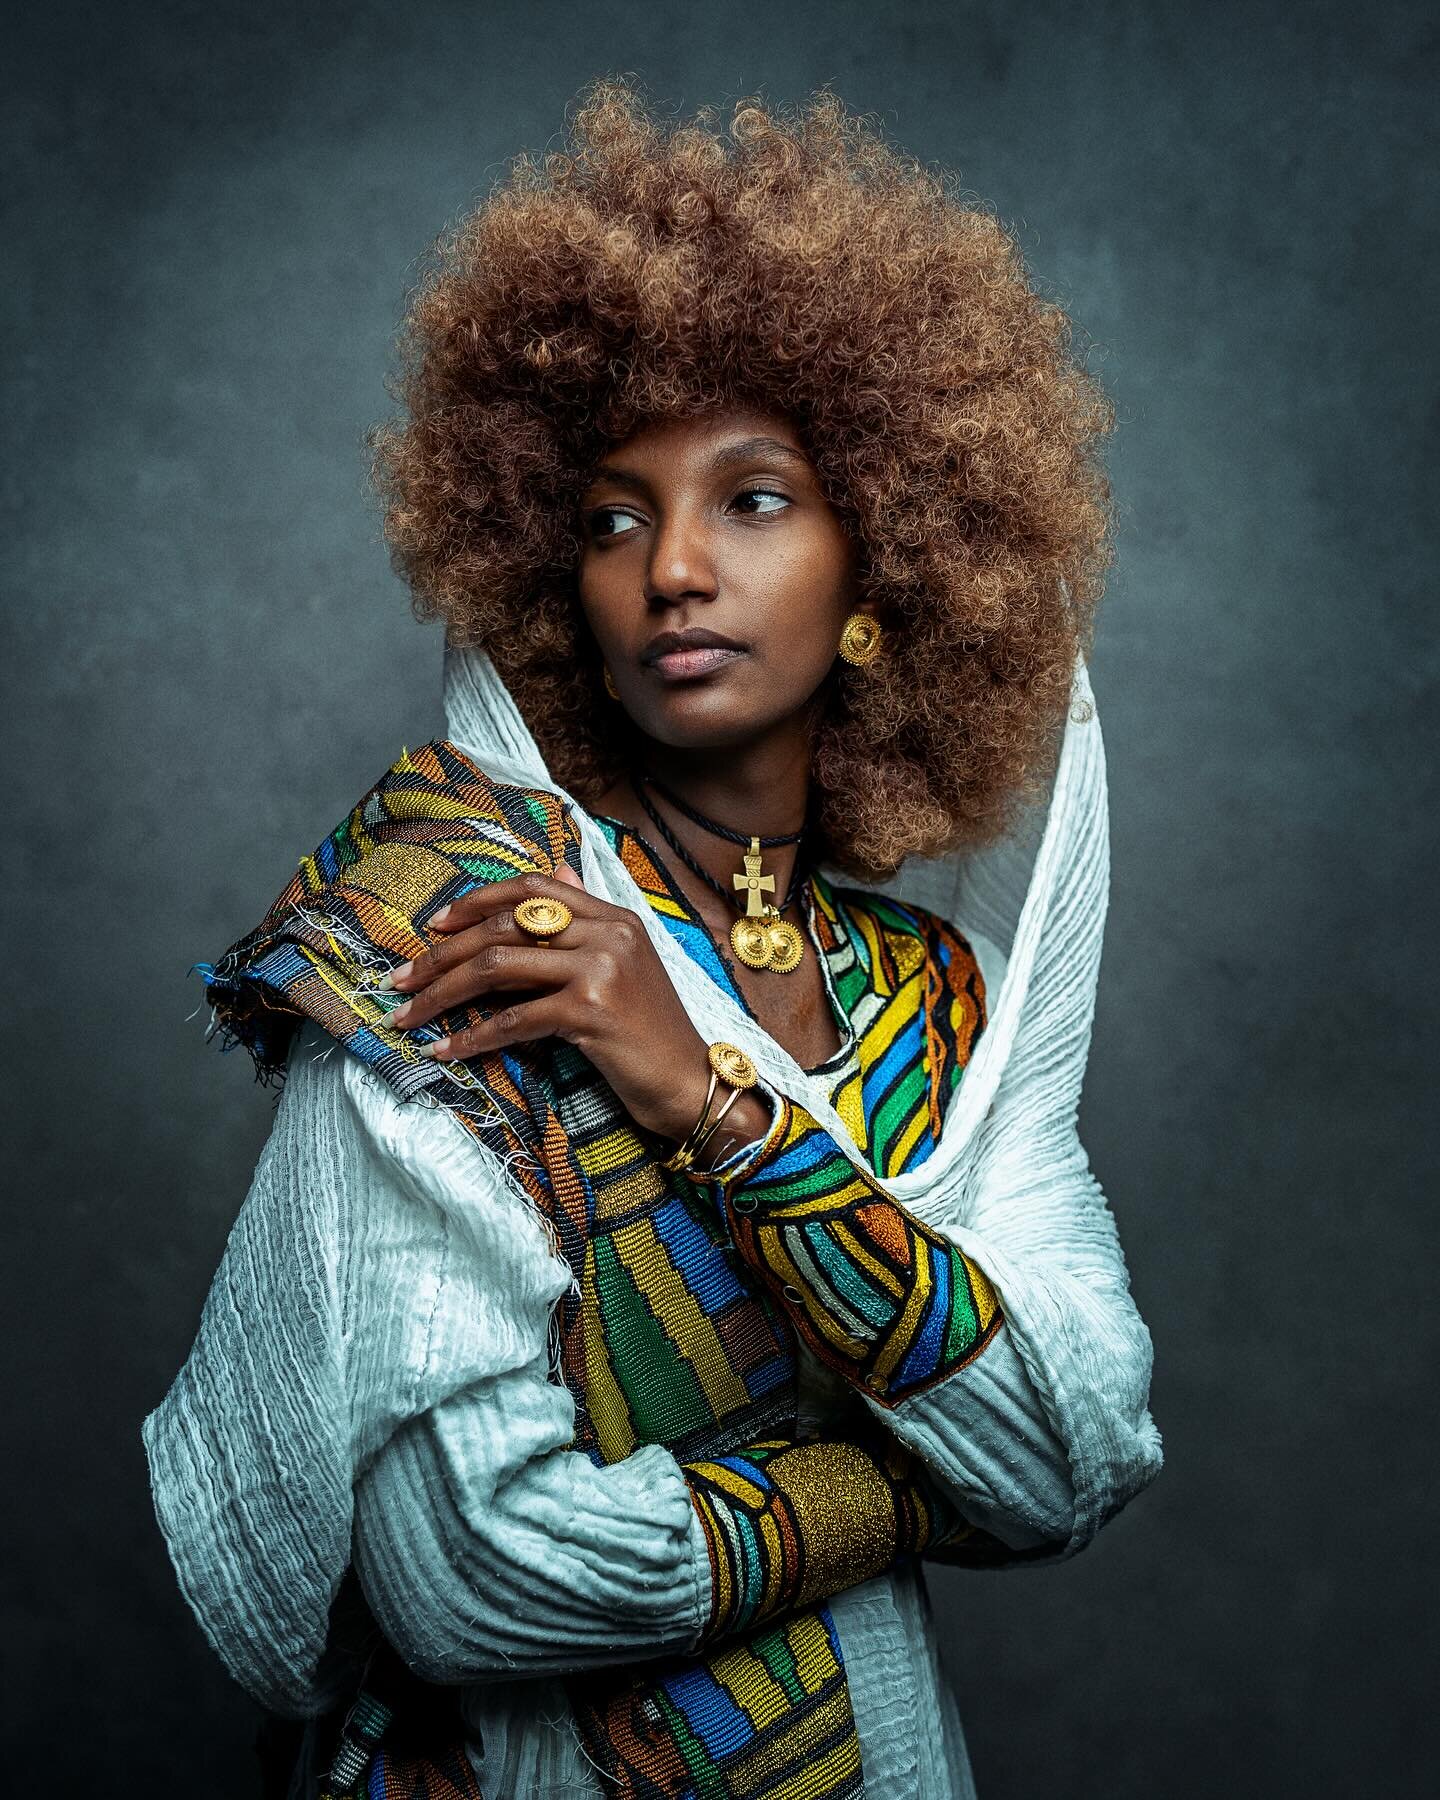 62/2024
&ldquo;Capturing the striking essence of Ethiopian beauty, these portraits showcase the vibrant culture and unique style of an extraordinary model. #EthiopianBeauty #CulturalChic #TraditionalTextiles #FashionHeritage #AfricanModel #StunningPo